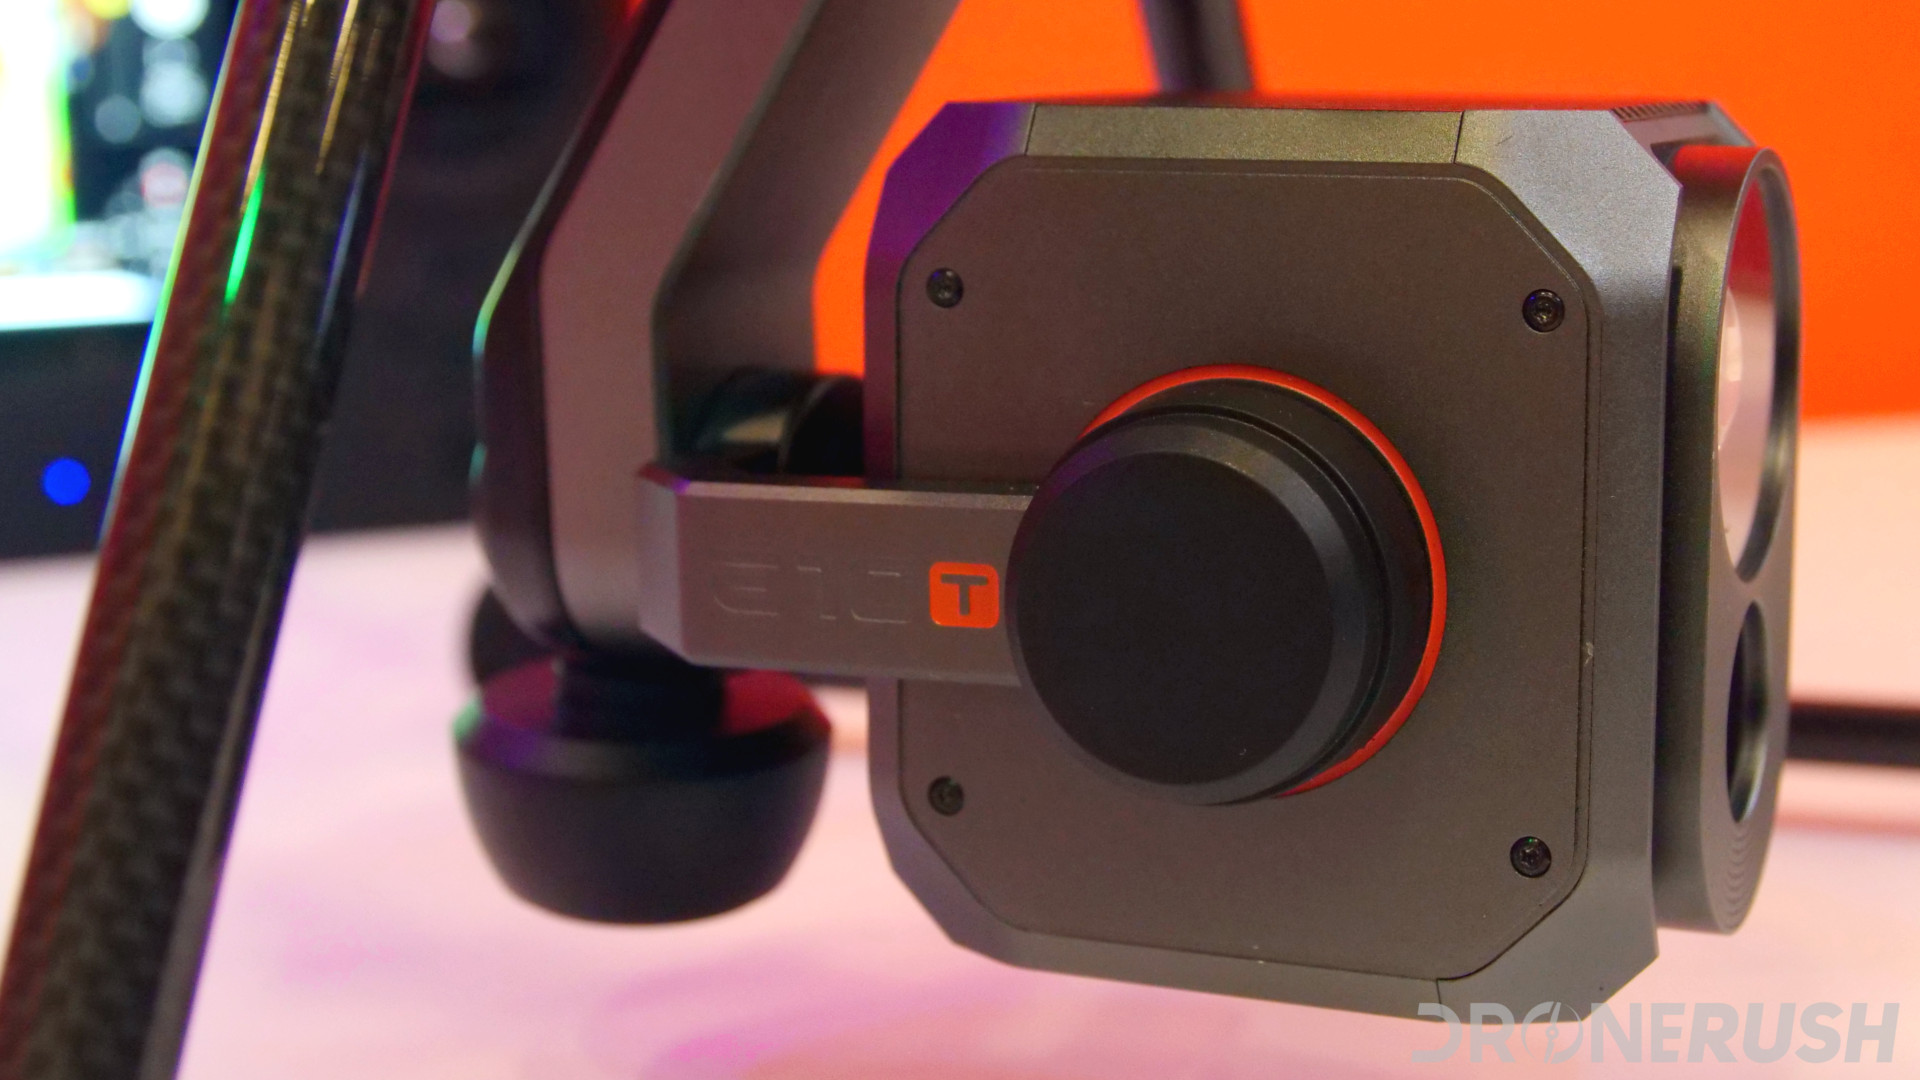 Yuneec E10T thermal camera side on H520 commercial drone at interdrone 2018